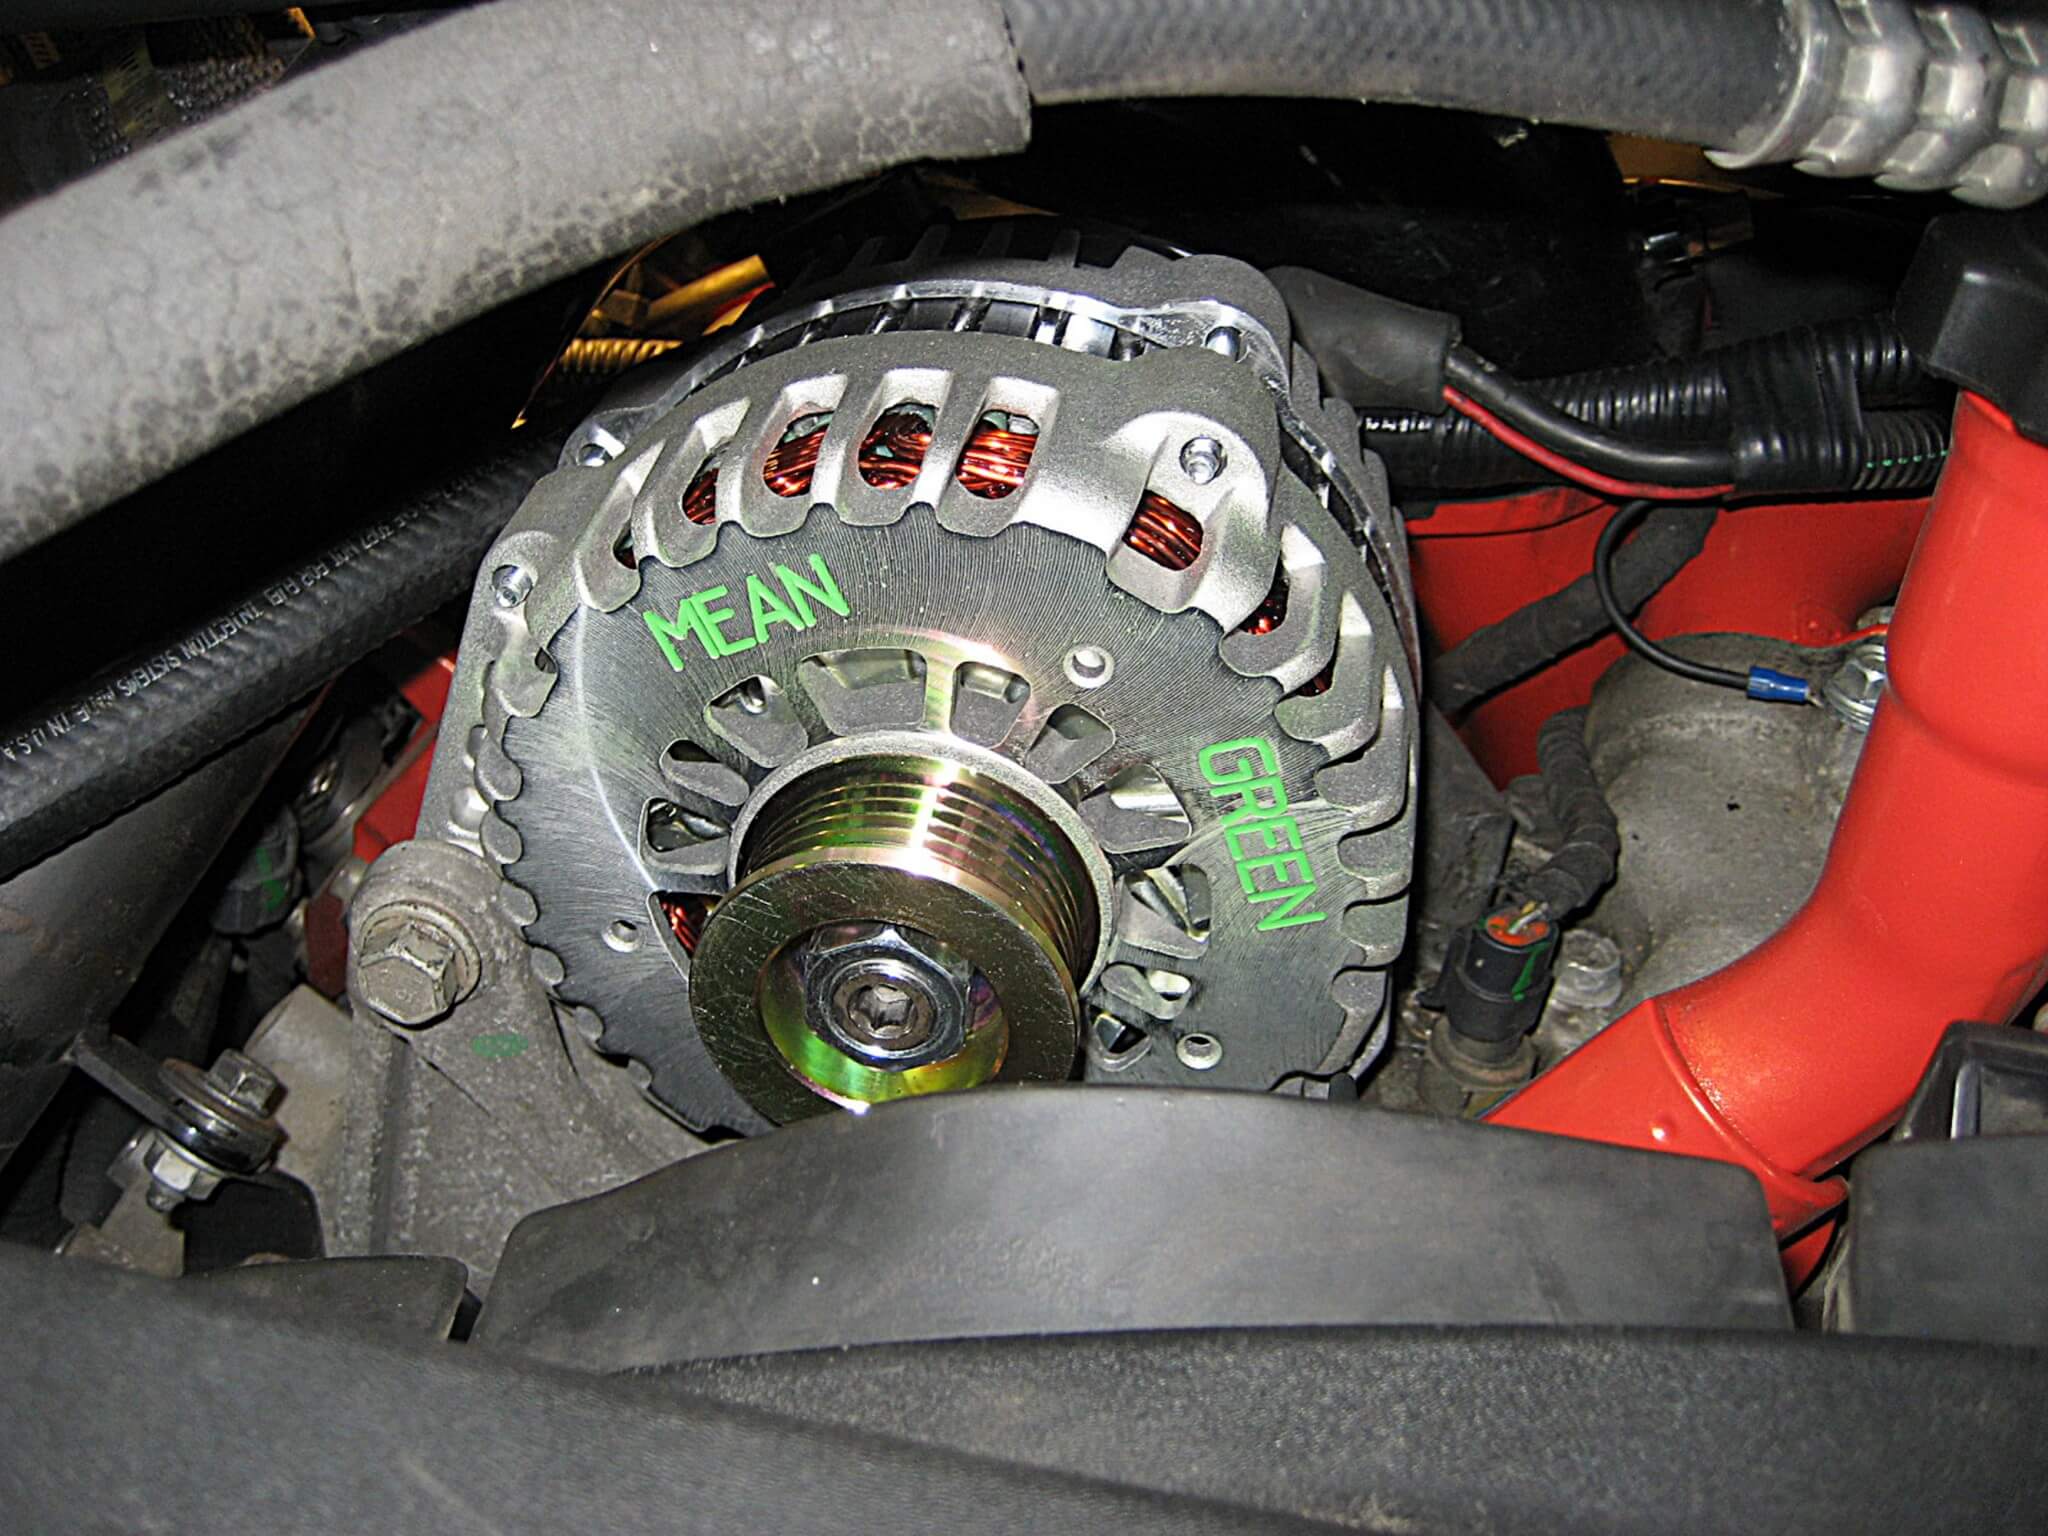 5. The Mean Green alternator is installed in the engine bay, using all the OEM mounting brackets and wiring. It’s a drop-in when replacing most OEM alternators in most applications. Exceptions do occasionally occur, due to a wide range of OEM options and accessories but are rare. 